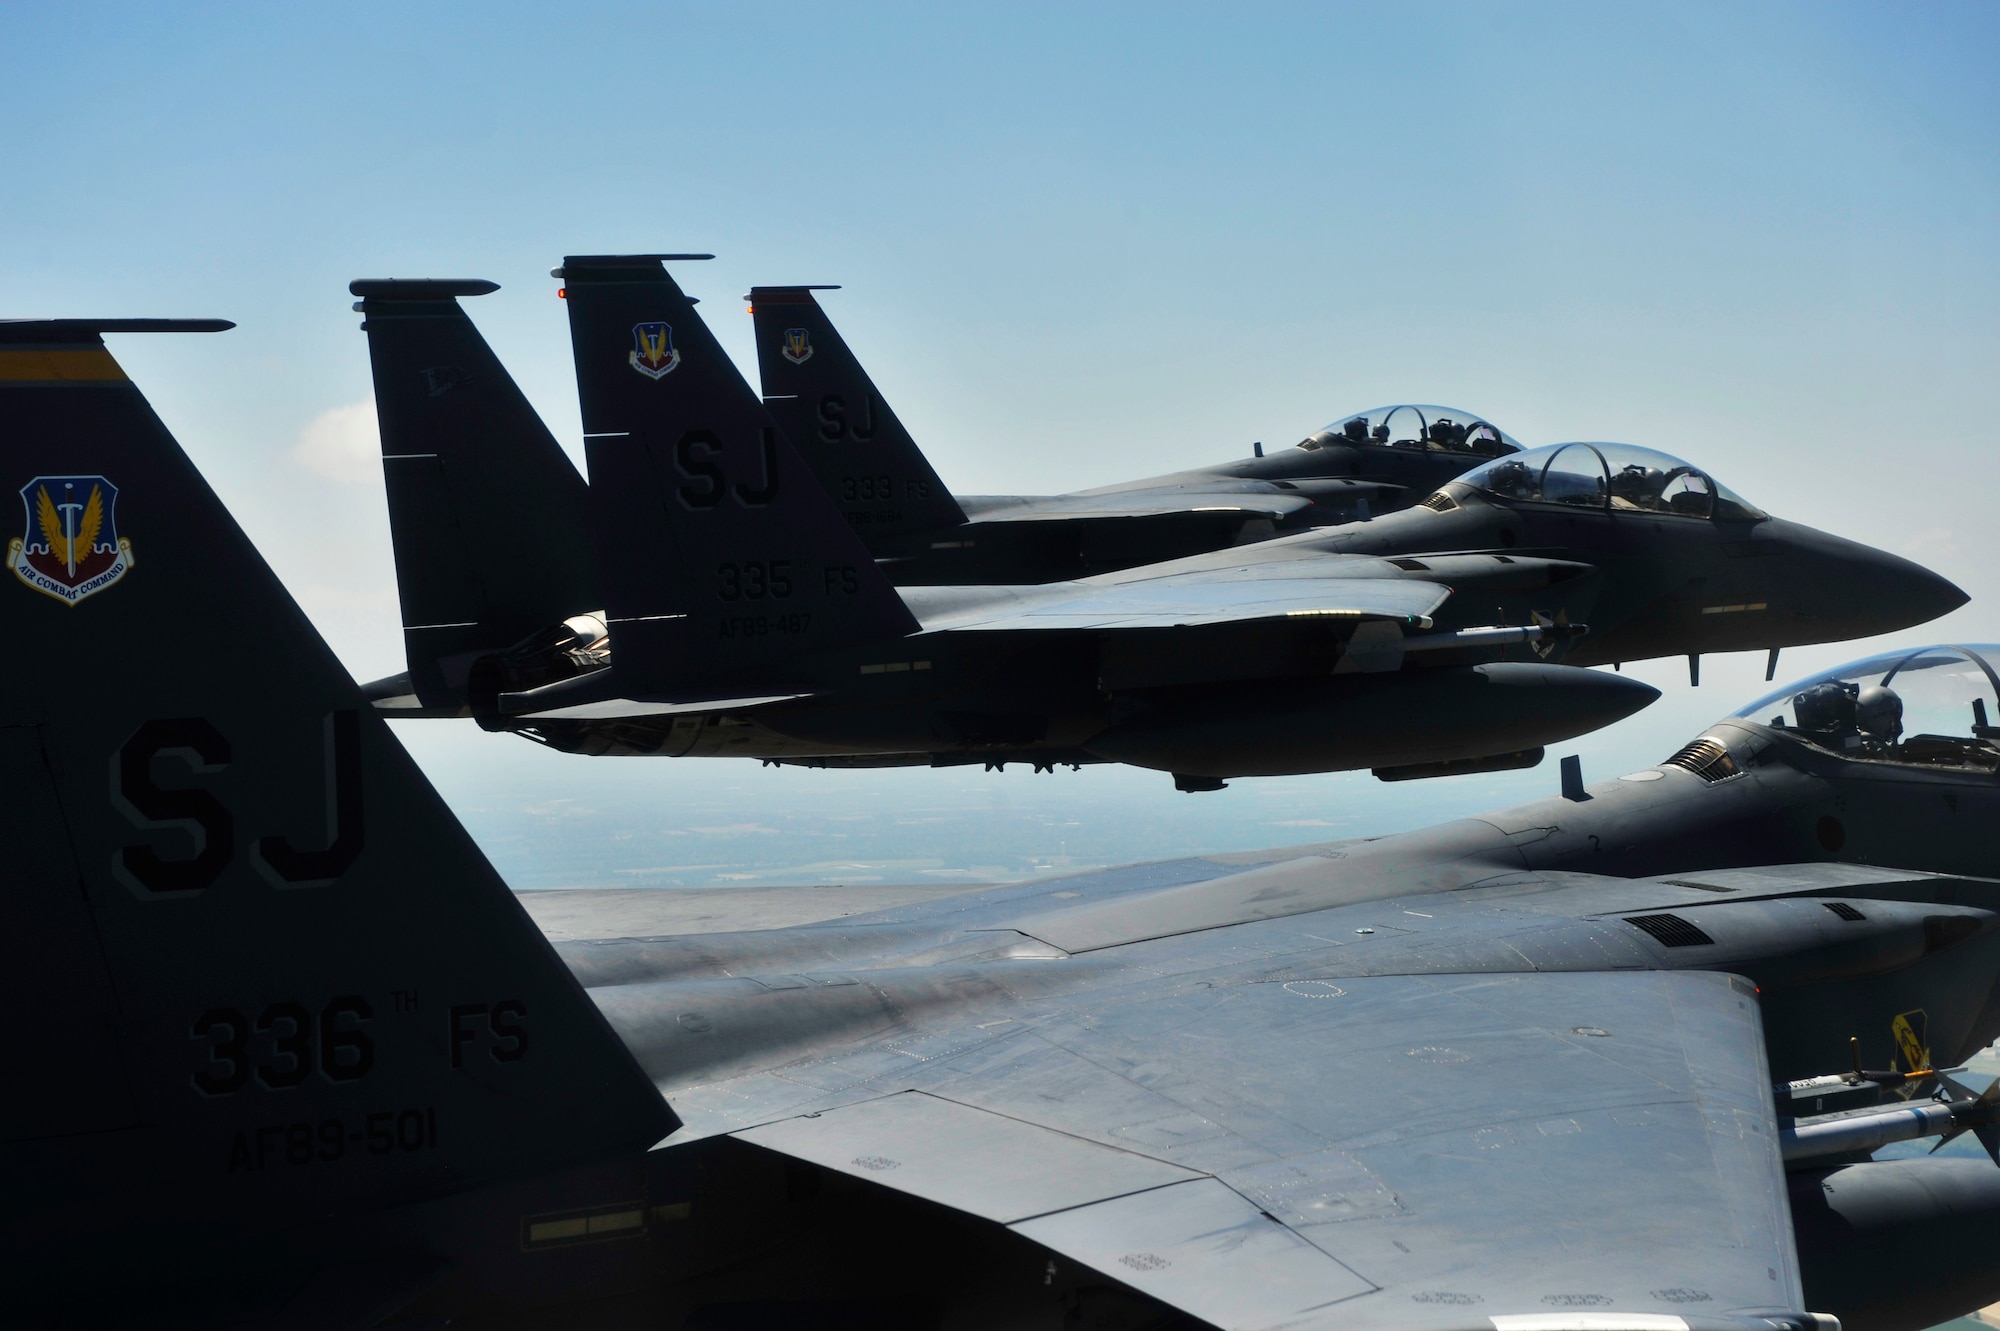 U.S. Air Force F-15E Strike Eagles from the 4th Fighter Wing fly in formation during a Turkey Shoot training mission near Seymour Johnson Air Force Base, N.C., April 16, 2012.  The wing generated nearly 70 aircraft to destroy more than 1,000 targets on bombing ranges across the state to commemorate the 4th Fighter Wing's victory over the Luftwaffe on April 16, 1945.  (U.S. Air Force Photo by Staff Sgt. Eric Harris/Released)